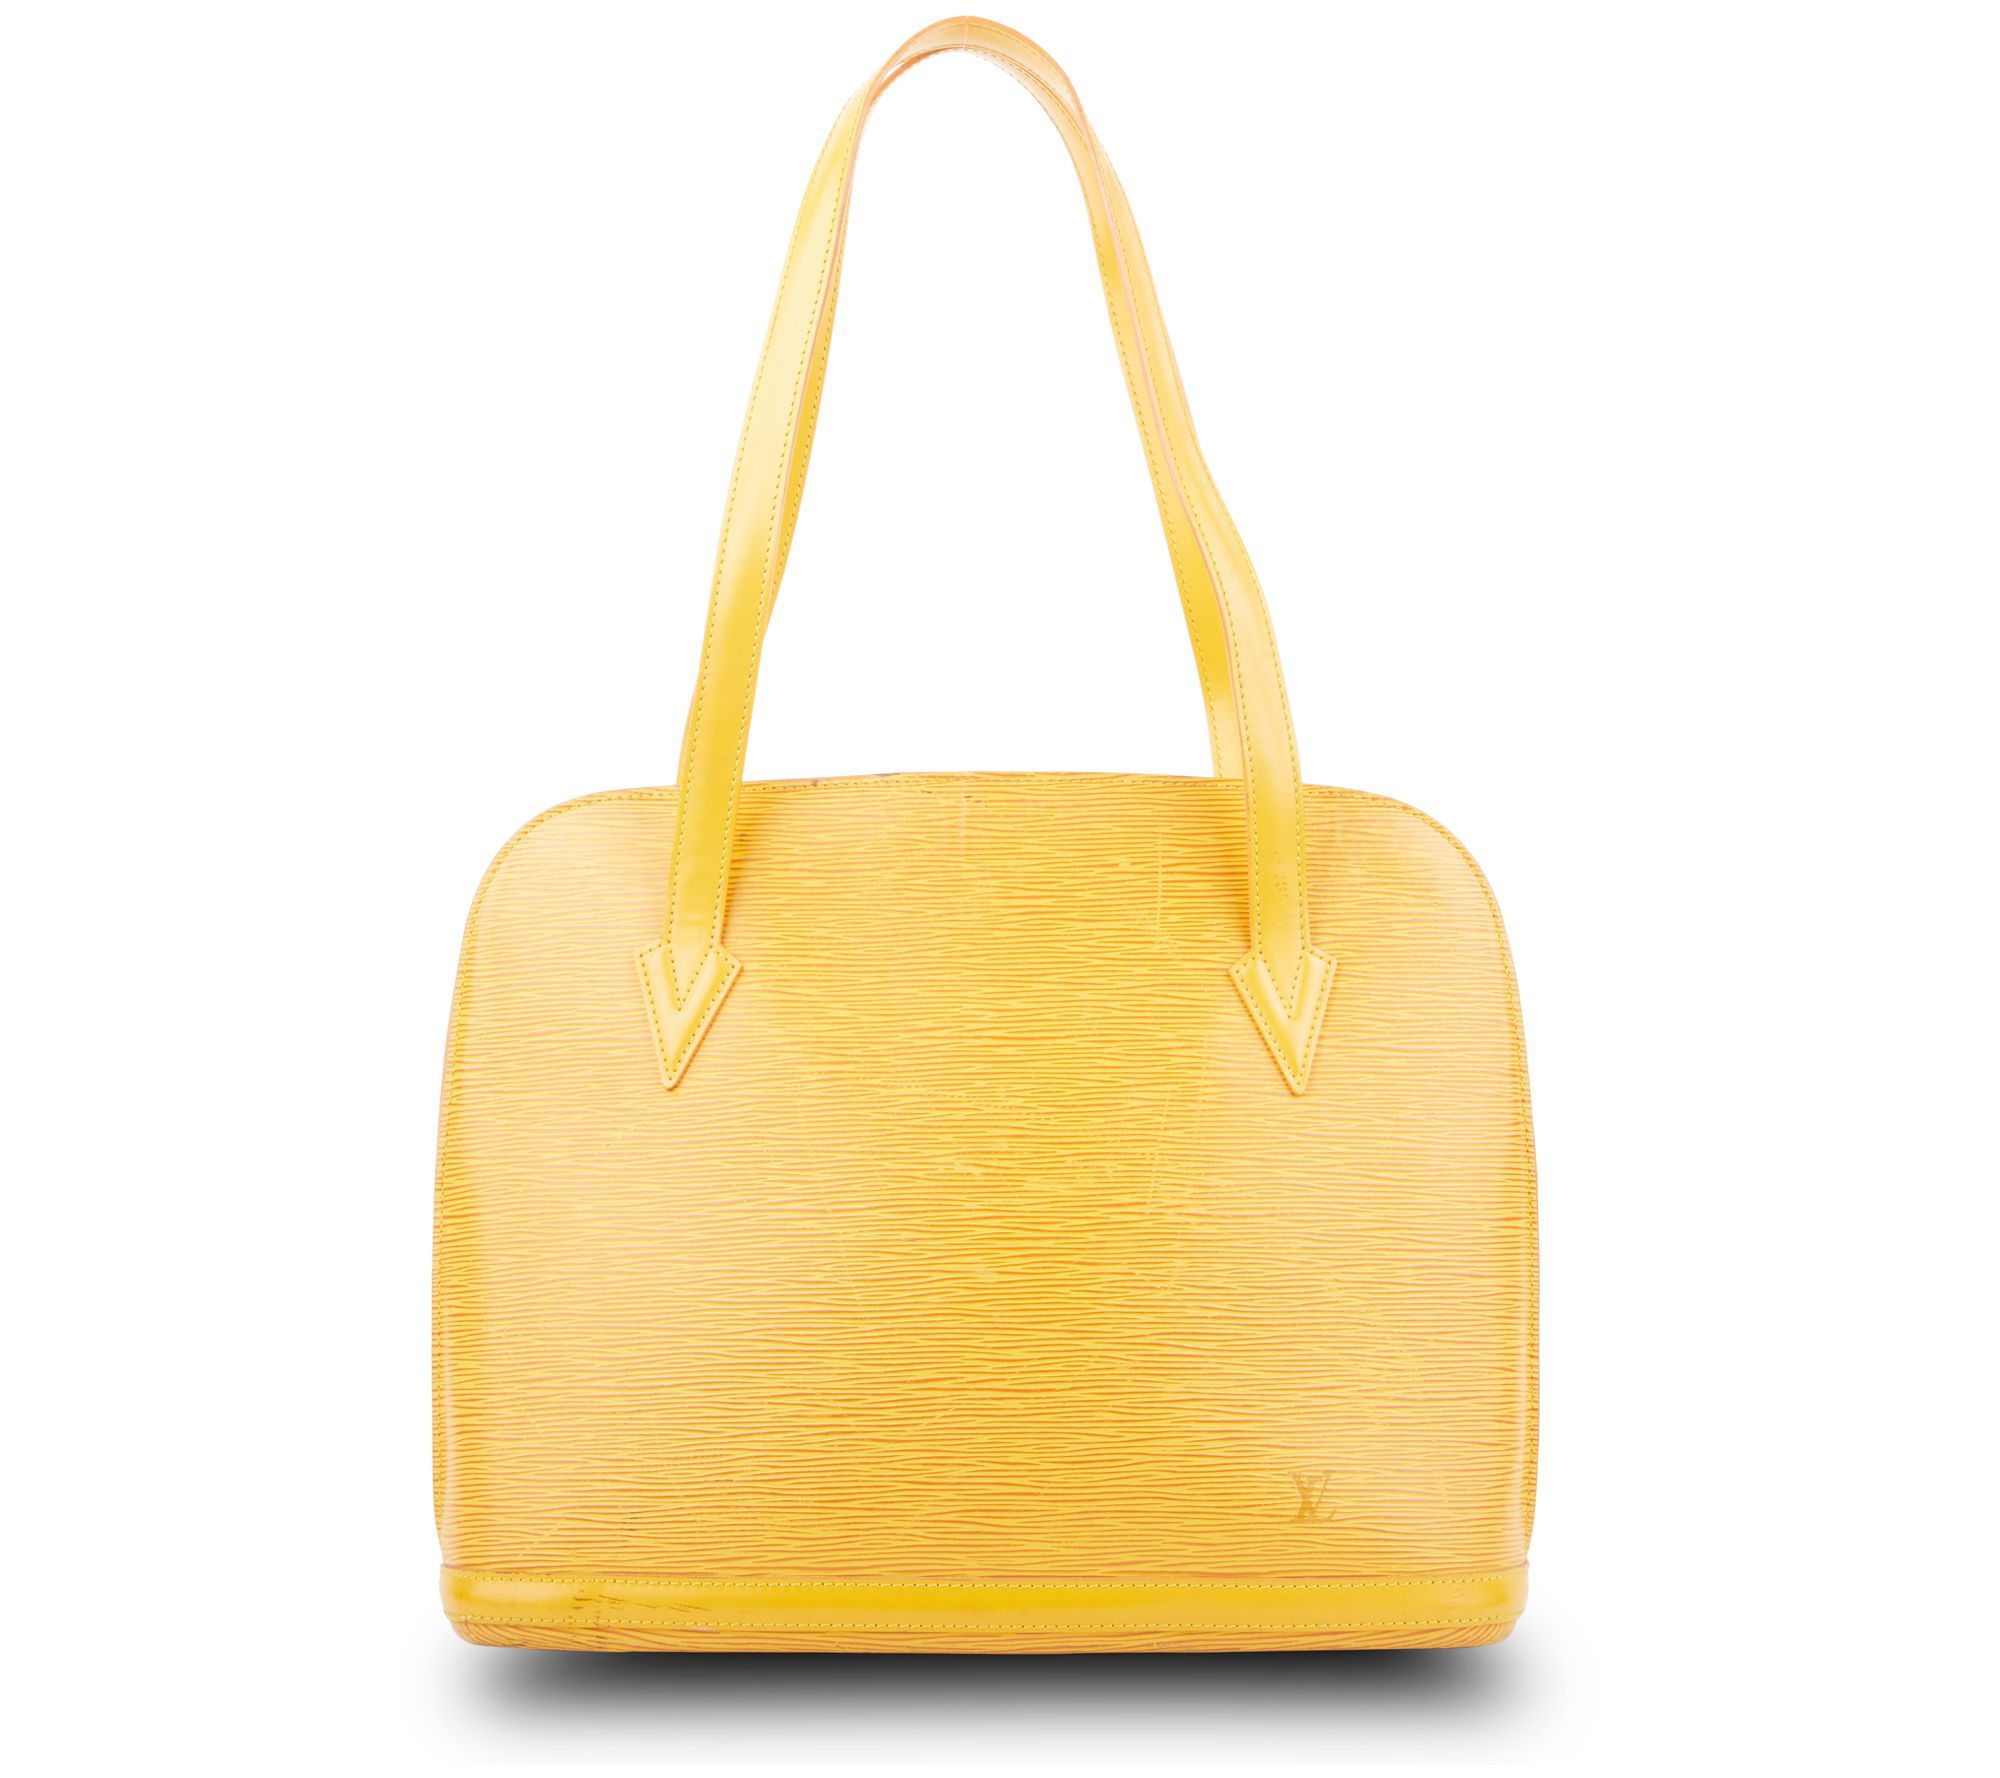 Pre-owned Louis Vuitton Purse In Yellow